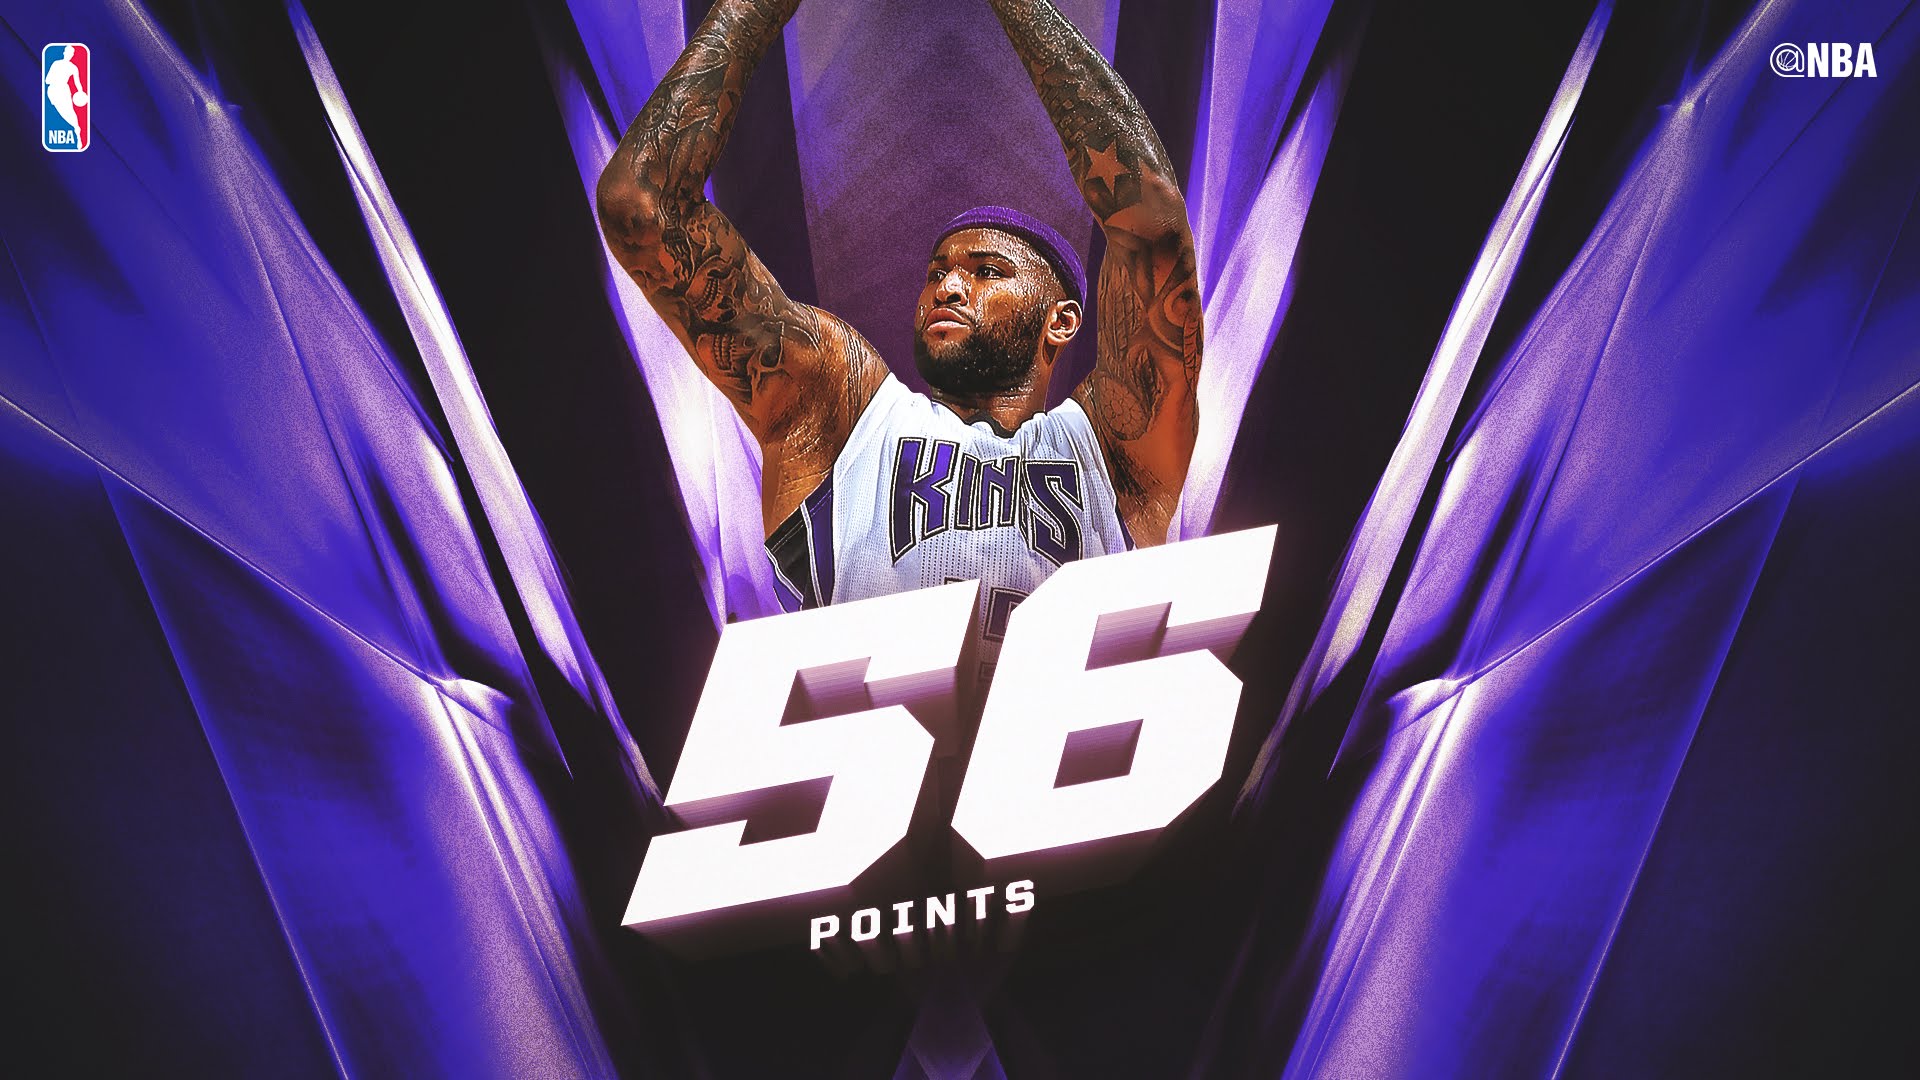 DeMarcus Cousins drops a 50 burger on the Charlotte Hornets